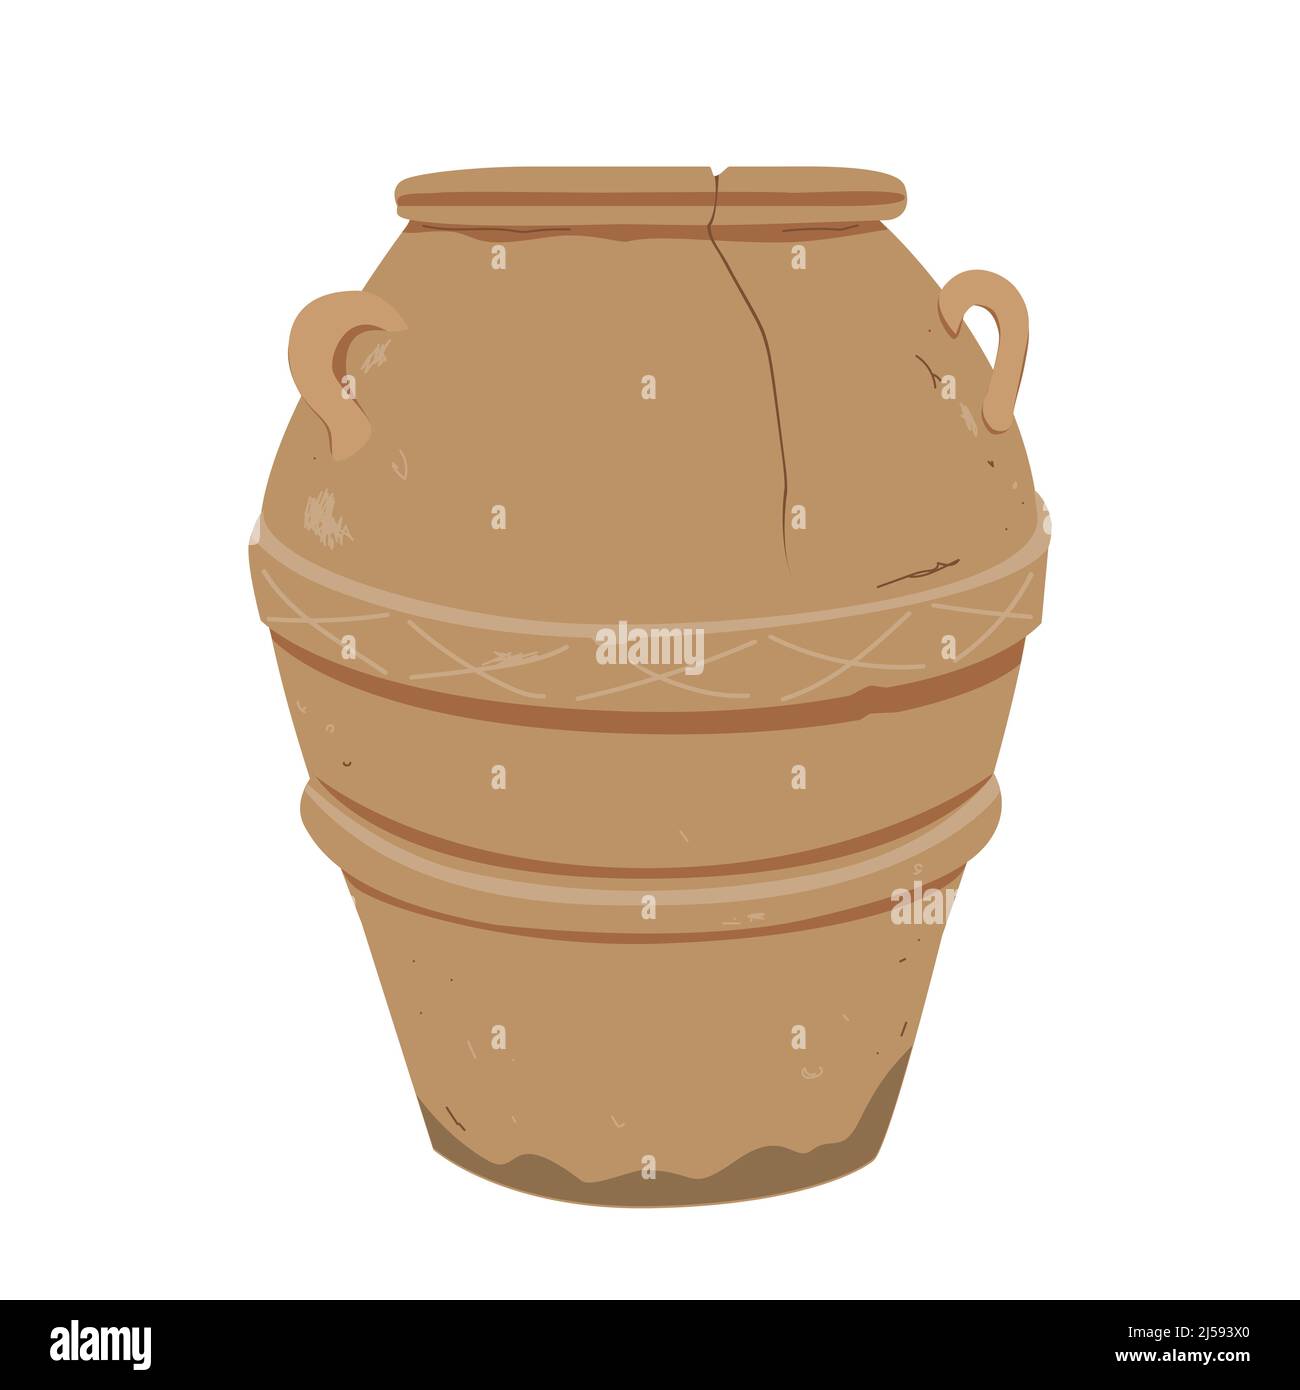 Old clay pot. Antique terracotta pottery, design element for home or patio decor. Vector illustration isolated on white. Stock Vector